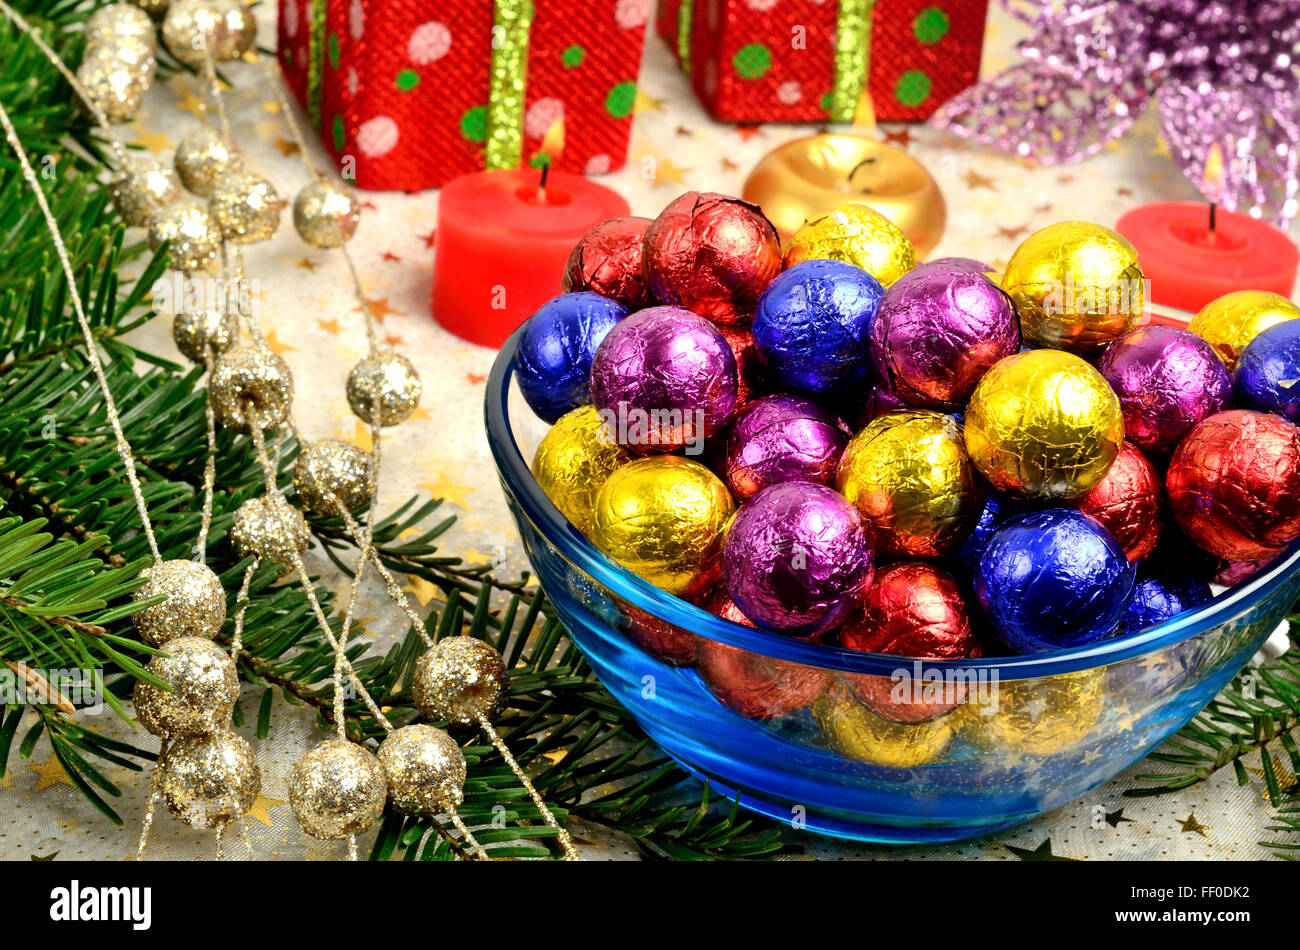 Christmas decoration and bowl with colorful tinfoil Stock Photo